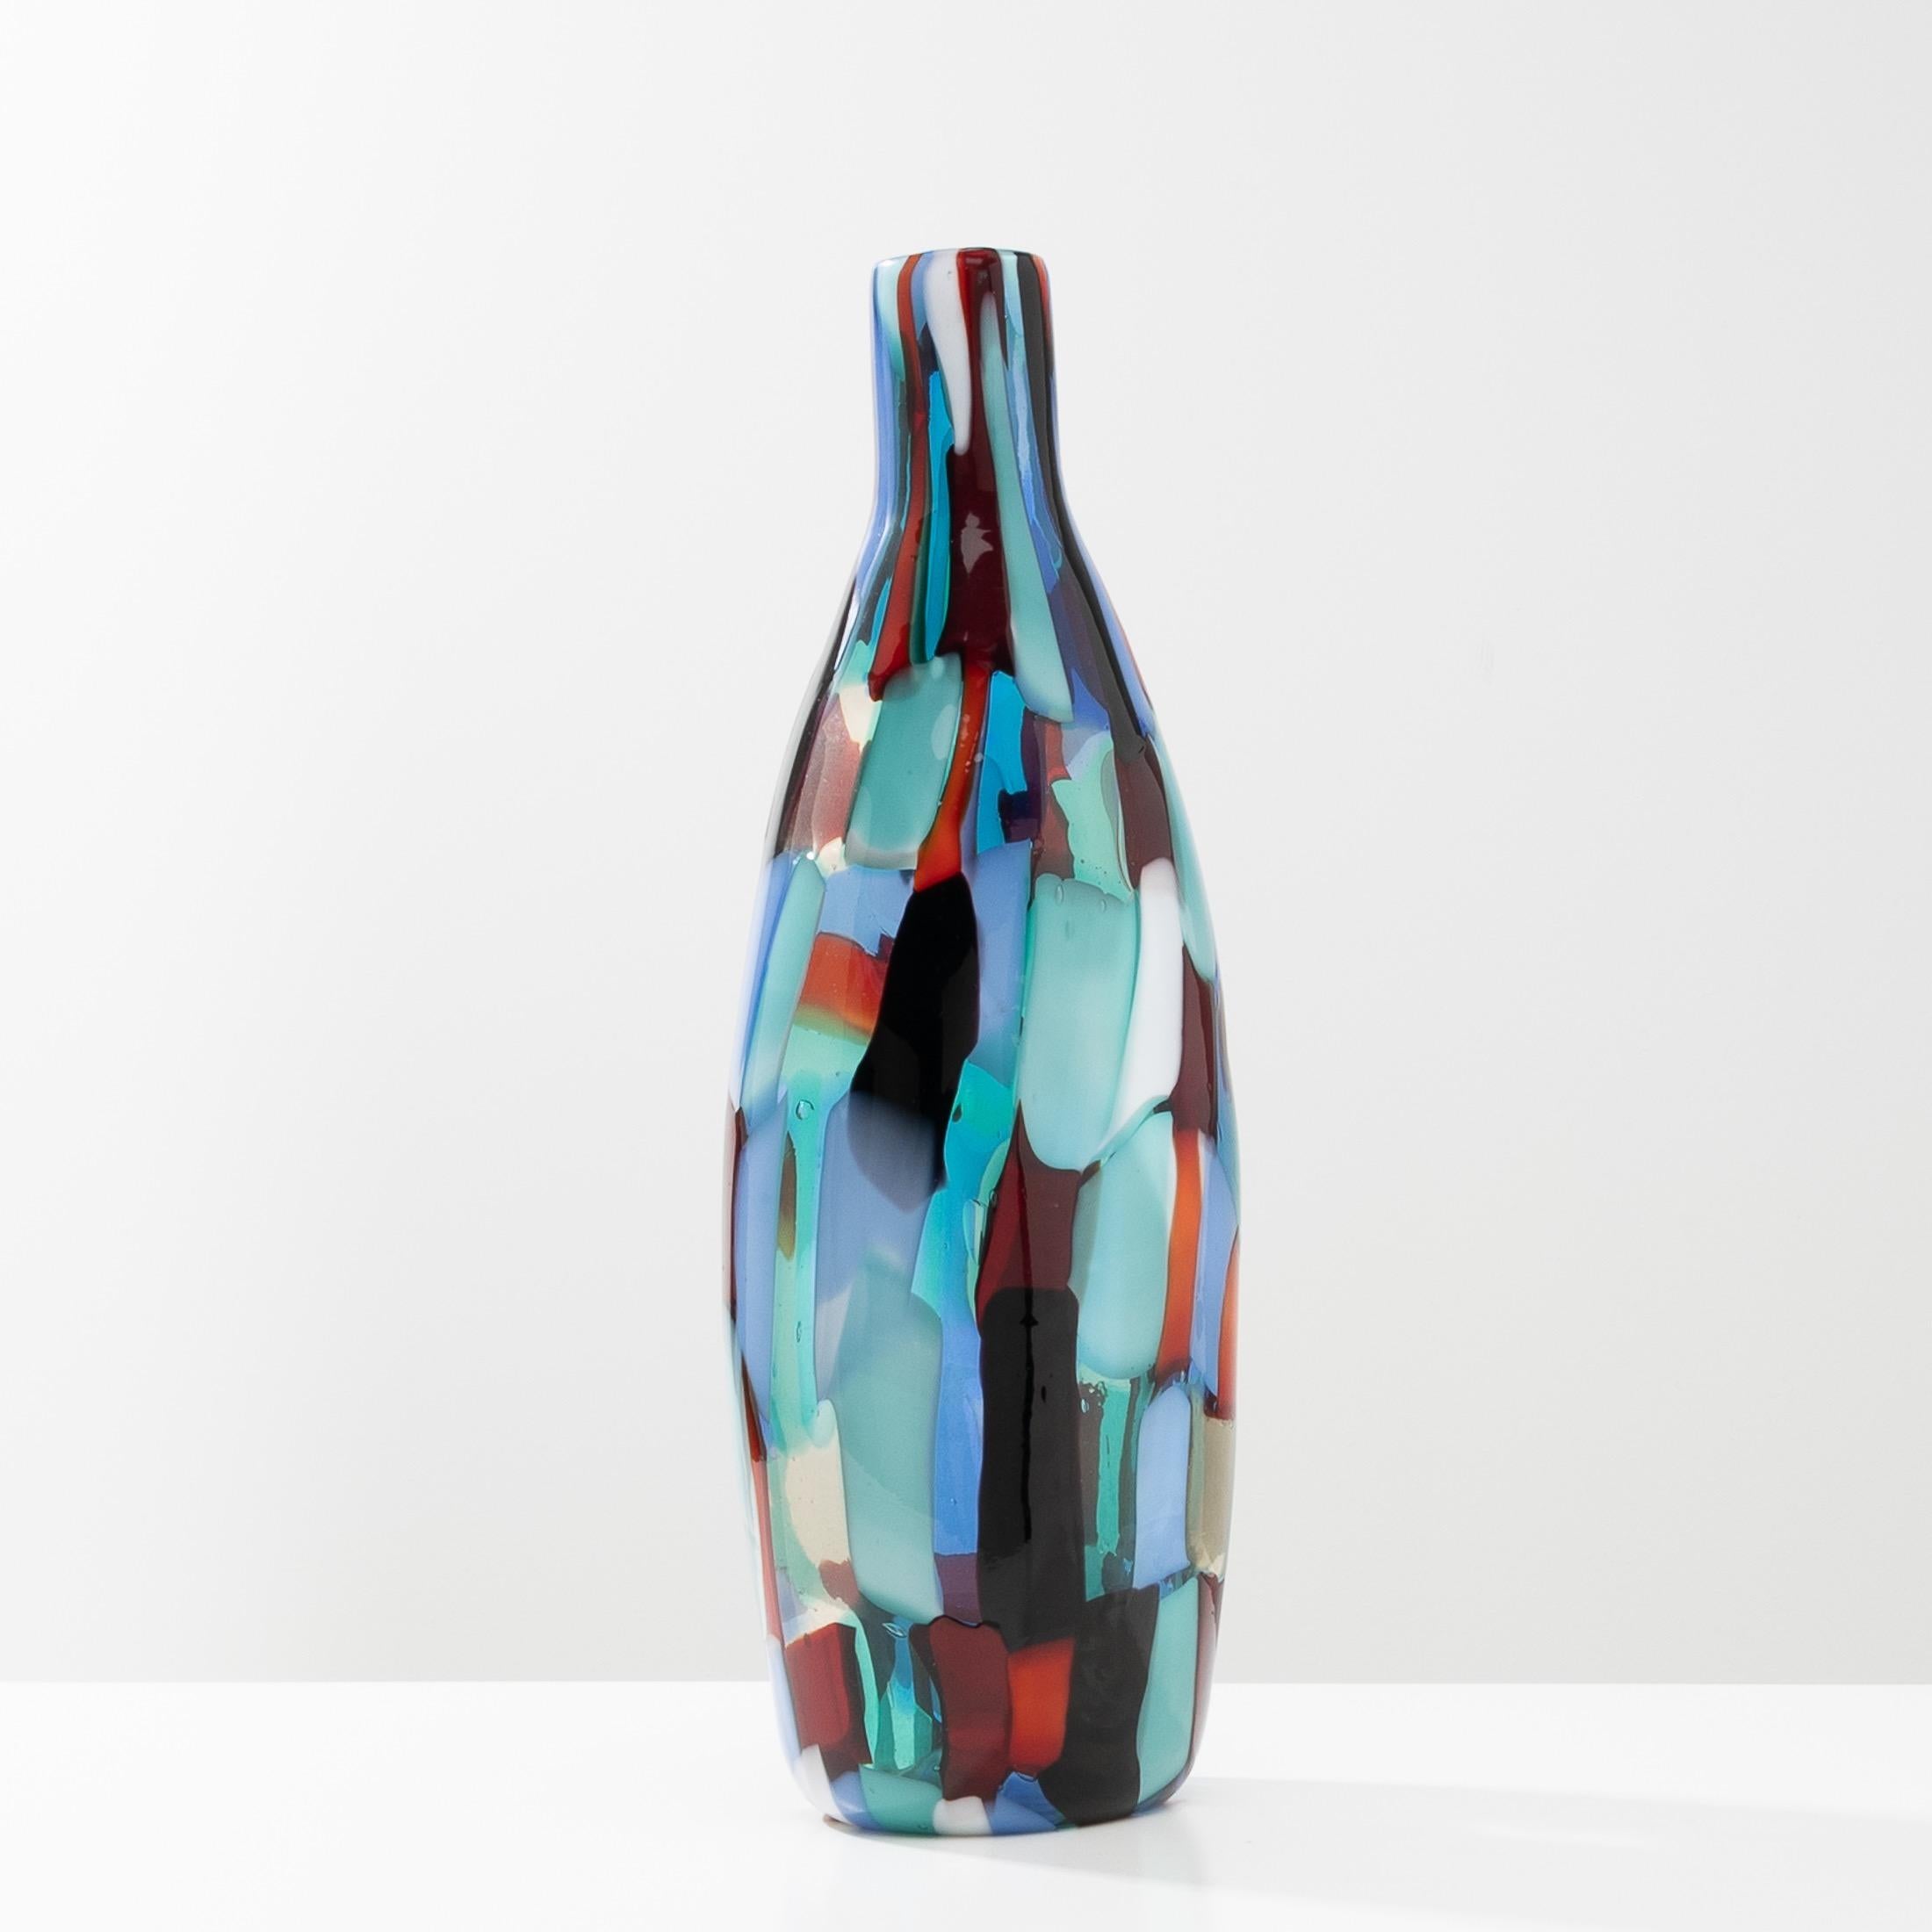 Pezzato Arlechino Bottle Shaped Vase by Fulvio Bianconi, Model 4319, Venini In Good Condition For Sale In Brussels, BE